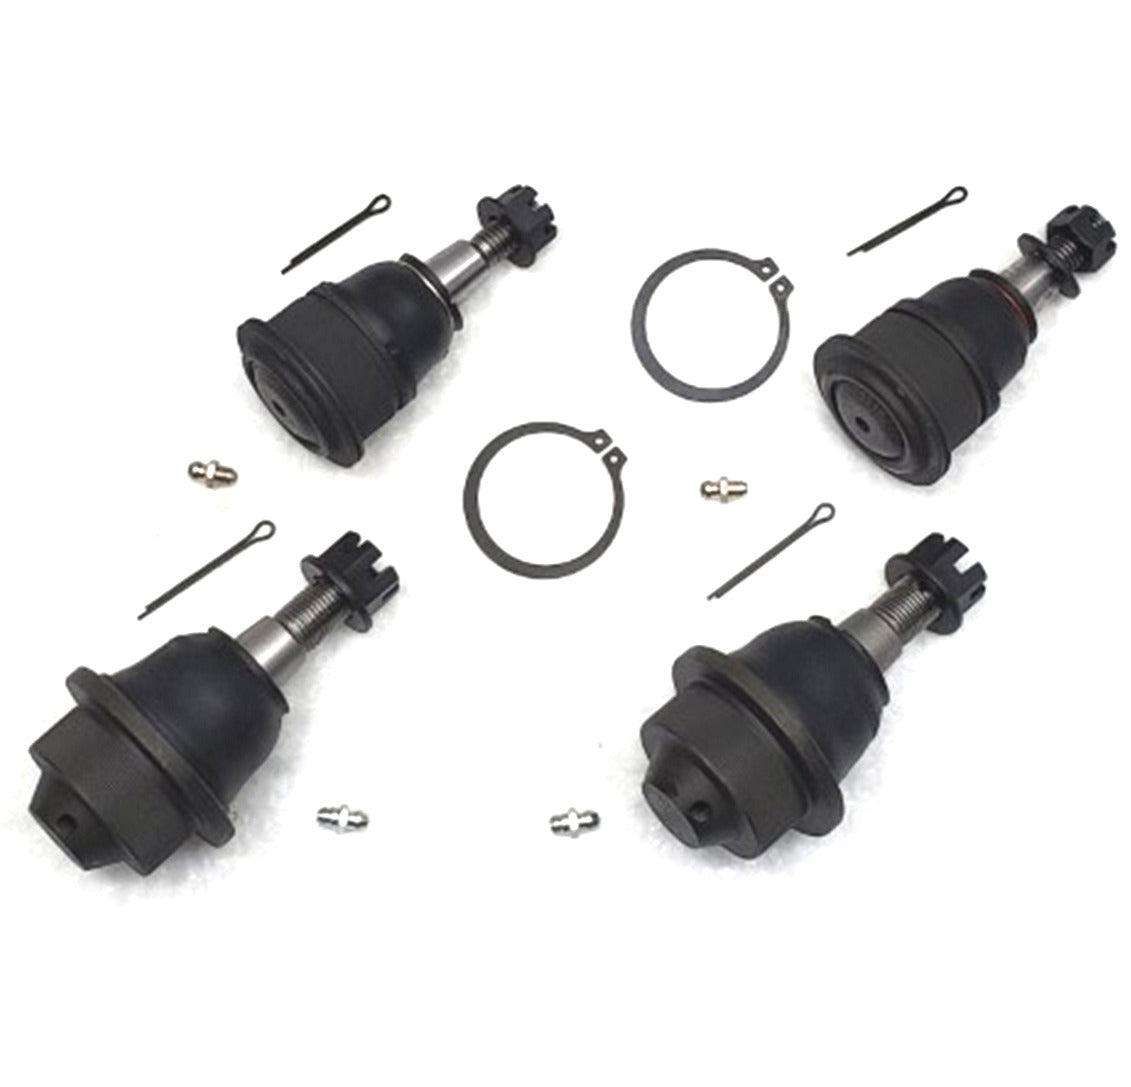 HD Ball Joints Upper and Lower Suspension Kit for 2001-2010 Chevrolet, GMC, Hummer 2WD, 4x4